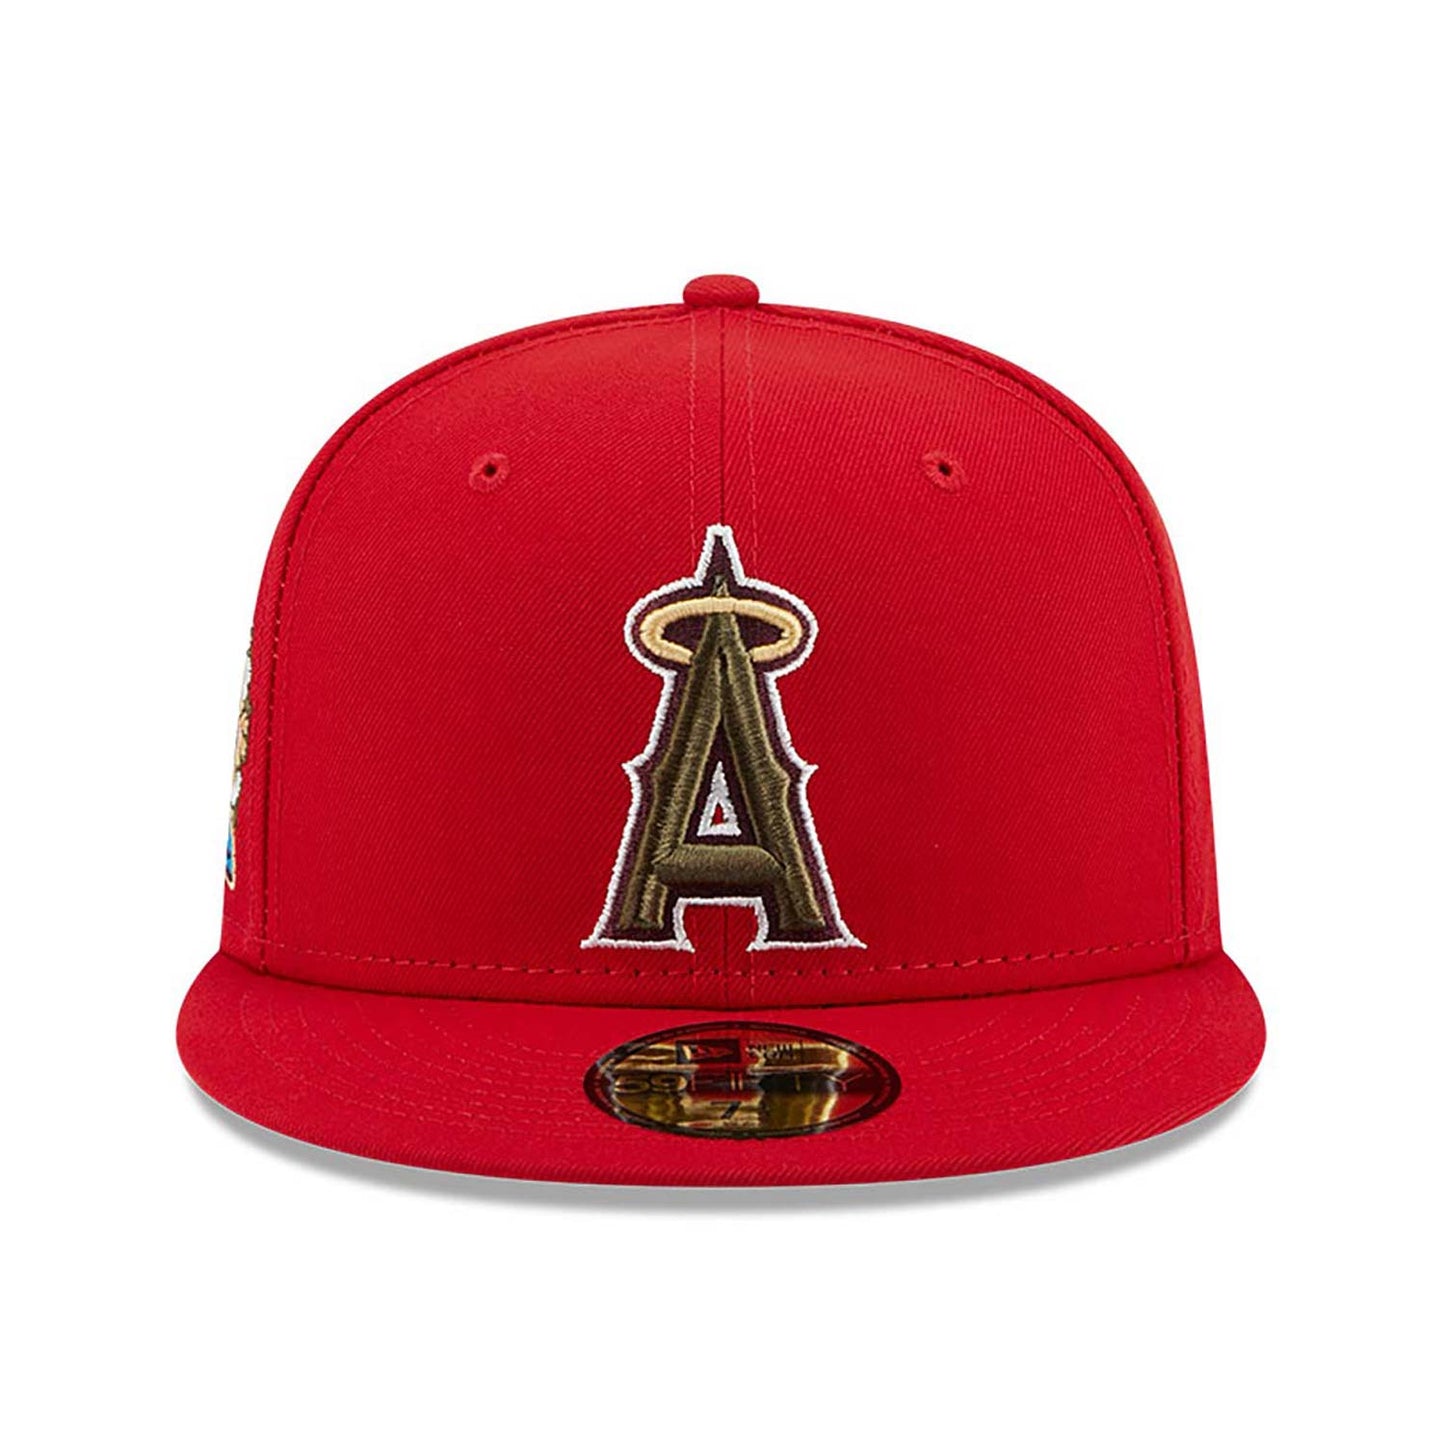 Angels fitted